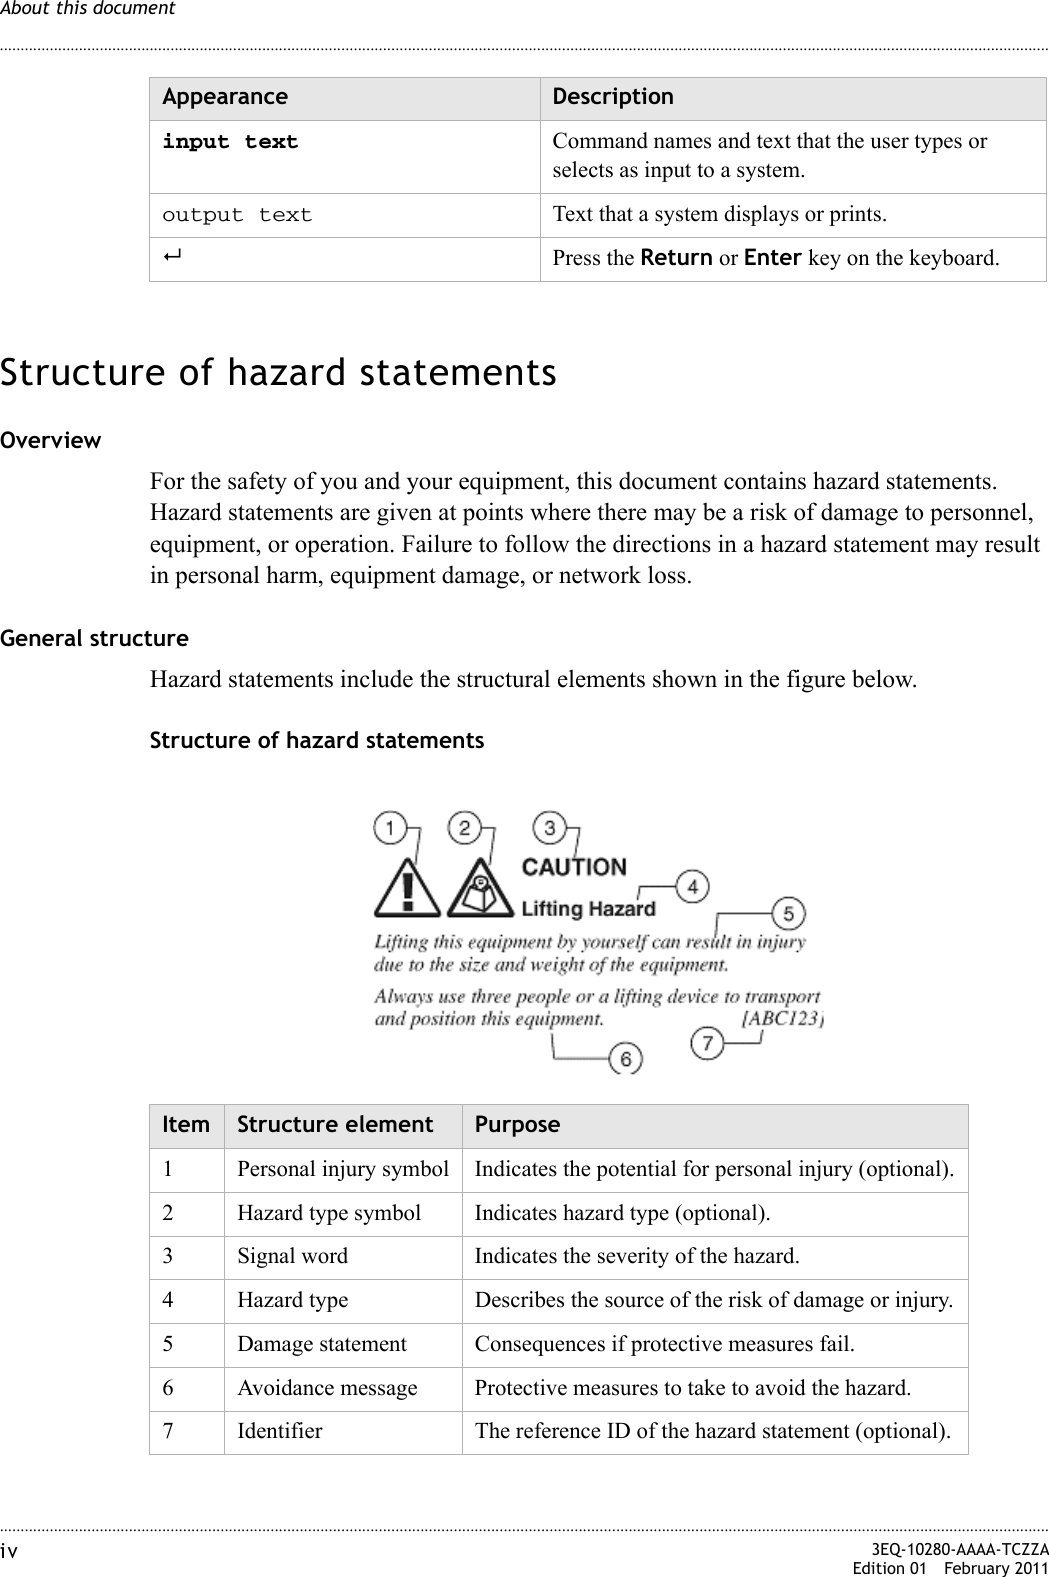 ............................................................................................................................................................................................................................................................About this documentiv  3EQ-10280-AAAA-TCZZAEdition 01 February 2011............................................................................................................................................................................................................................................................Structure of hazard statementsOverviewFor the safety of you and your equipment, this document contains hazard statements. Hazard statements are given at points where there may be a risk of damage to personnel, equipment, or operation. Failure to follow the directions in a hazard statement may result in personal harm, equipment damage, or network loss.General structureHazard statements include the structural elements shown in the figure below.Structure of hazard statementsinput text Command names and text that the user types or selects as input to a system.output text Text that a system displays or prints.Press the Return or Enter key on the keyboard.Appearance DescriptionItem Structure element Purpose1 Personal injury symbol Indicates the potential for personal injury (optional).2 Hazard type symbol Indicates hazard type (optional).3 Signal word Indicates the severity of the hazard.4 Hazard type Describes the source of the risk of damage or injury.5 Damage statement Consequences if protective measures fail.6 Avoidance message Protective measures to take to avoid the hazard.7 Identifier The reference ID of the hazard statement (optional).